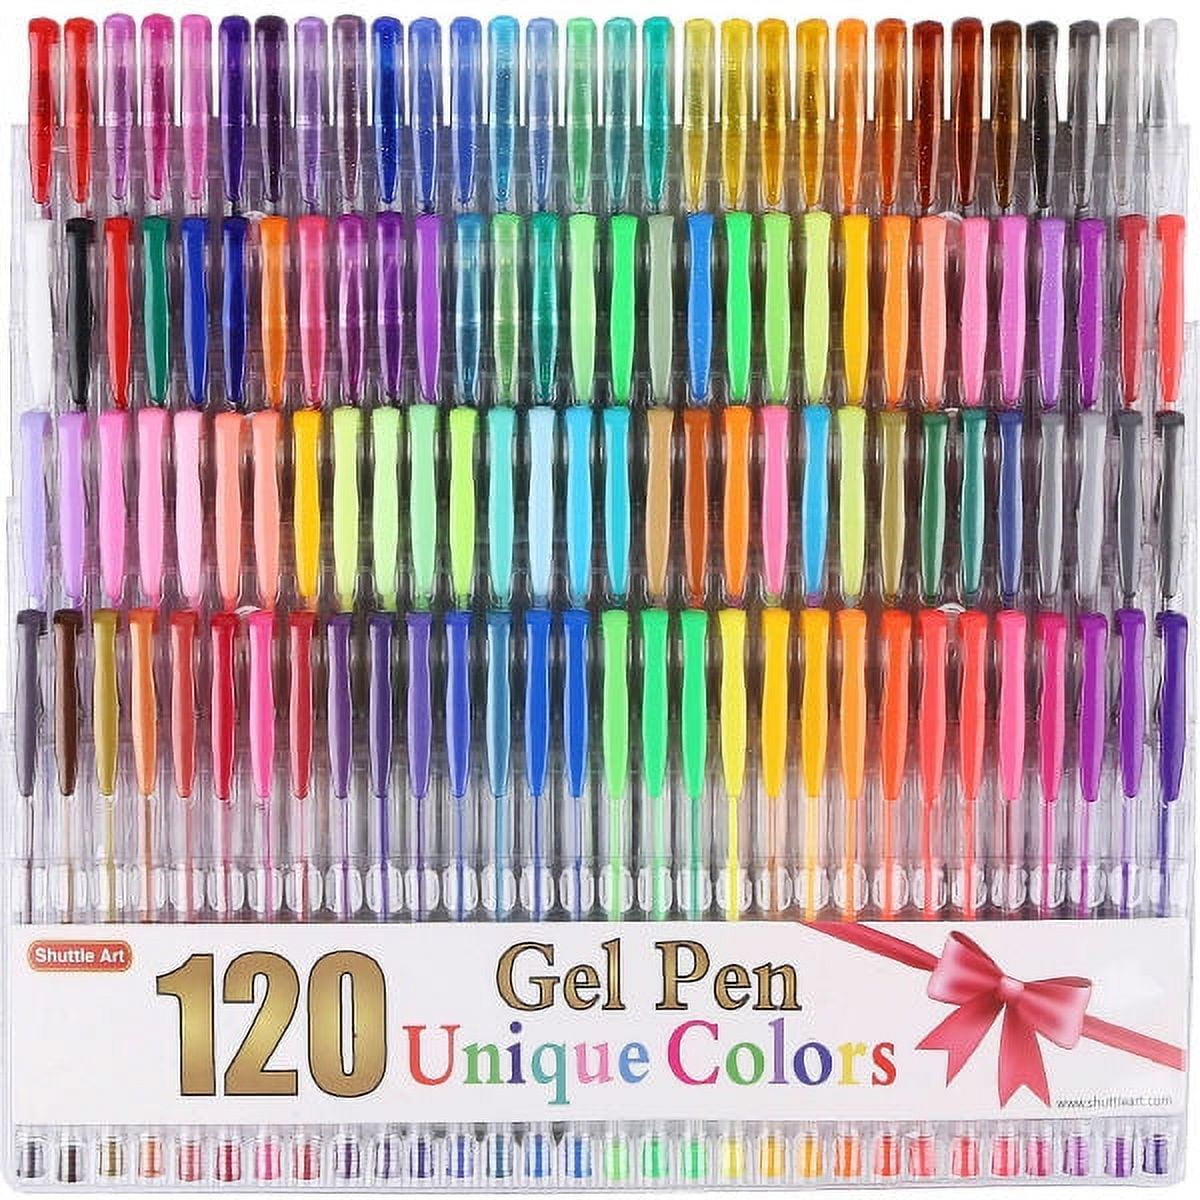 120 Colors Gel Pens Refills for Adult Coloring Books, 40% More Ink for Aen  Art